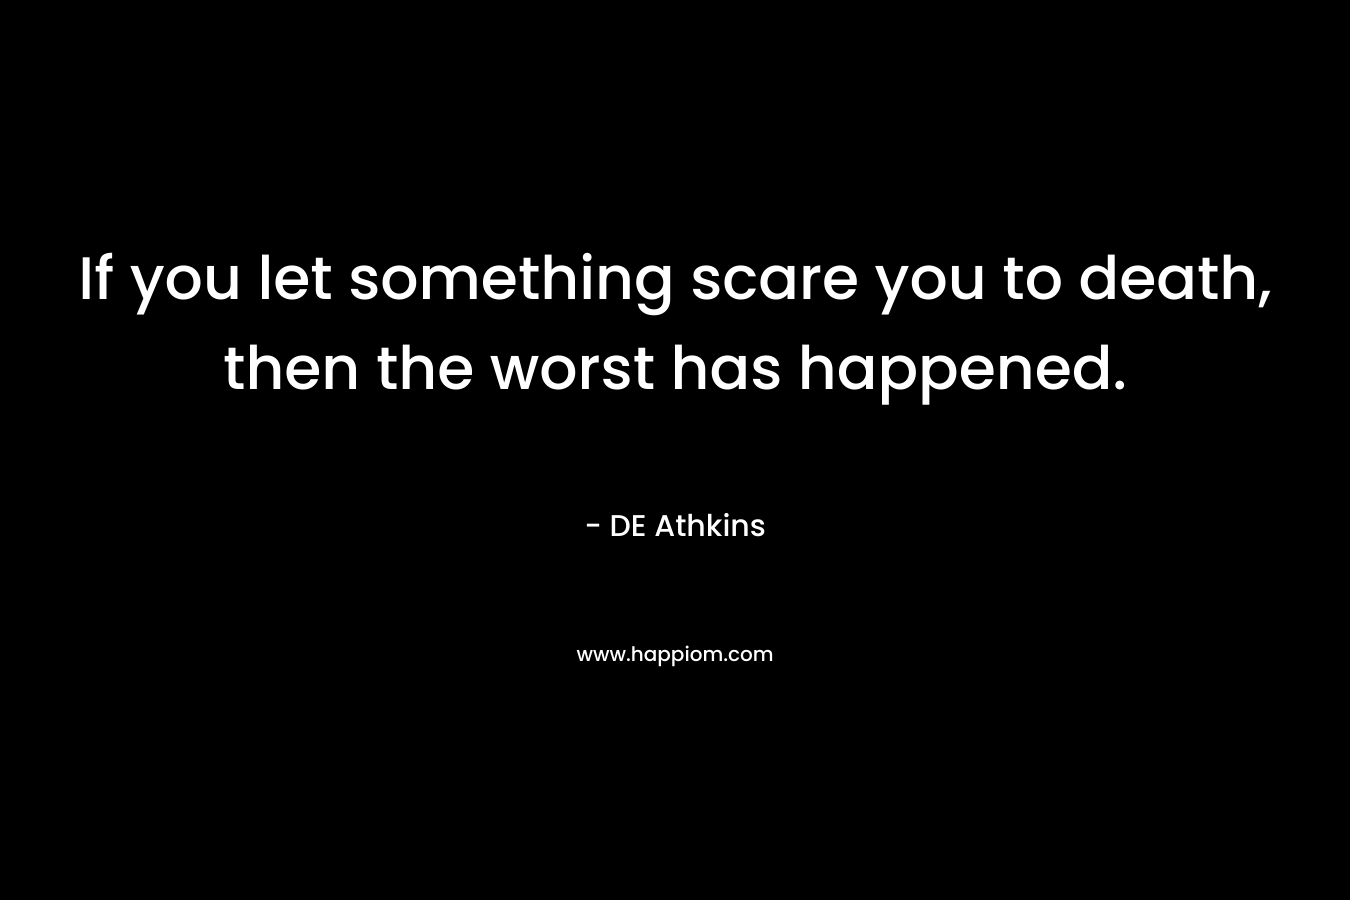 If you let something scare you to death, then the worst has happened. – DE Athkins